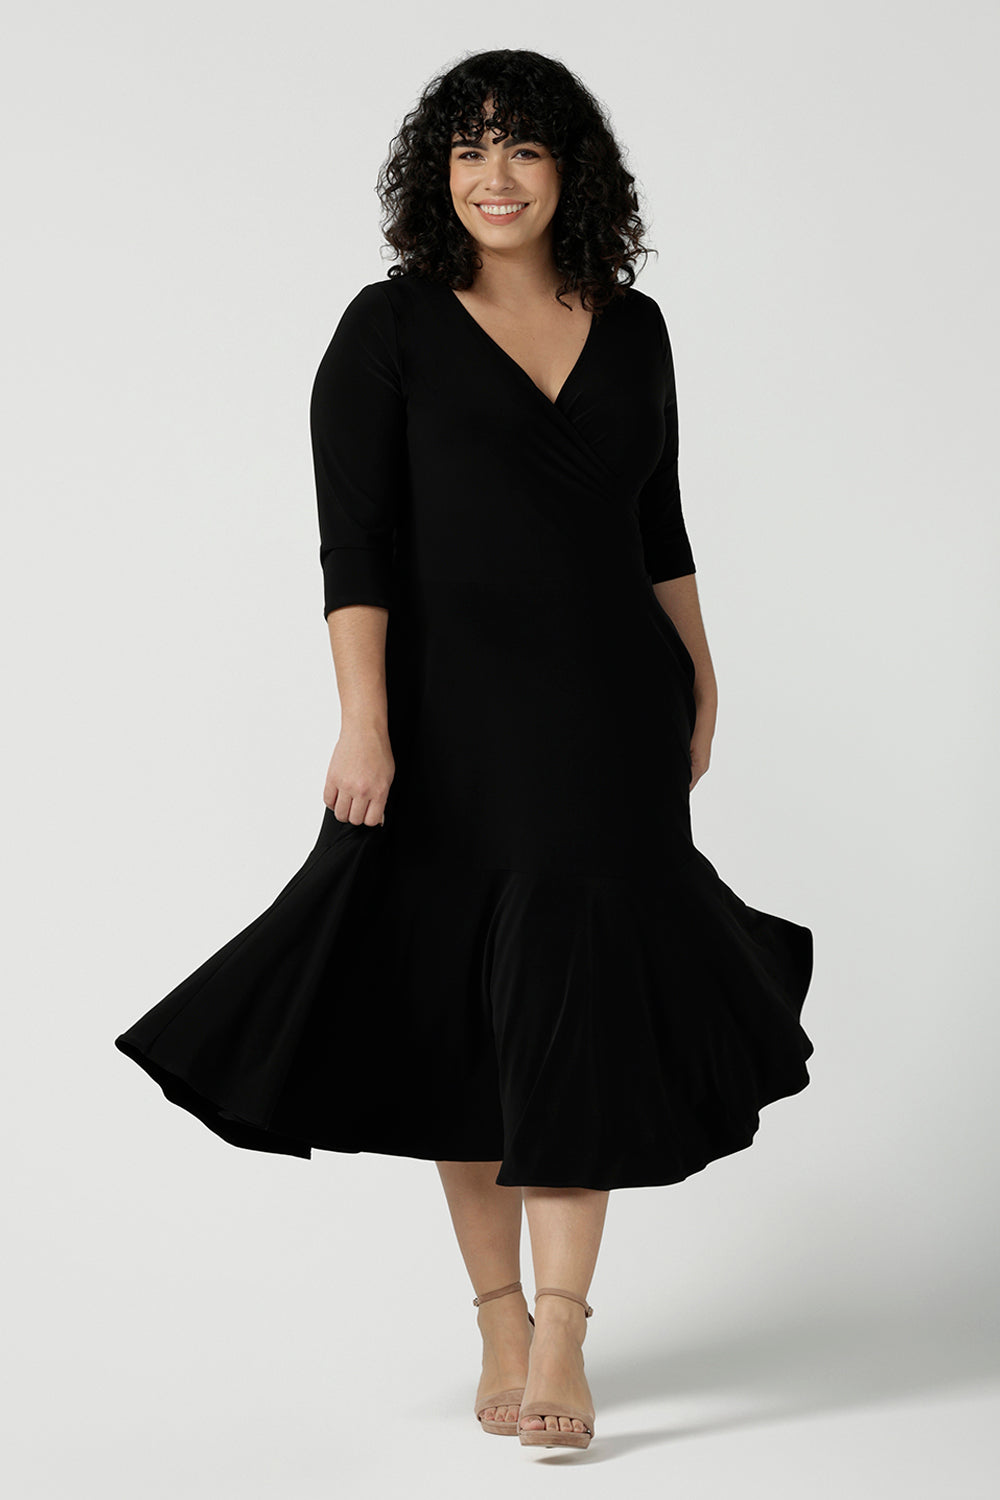 Size 16 Woman wears a Bettina Petite Reversible dress in black. A reversible dress for stylish casual wear. Soft stretch jersey with pockets and a wrap top. Made in Australia for women. Size 8 - 24.